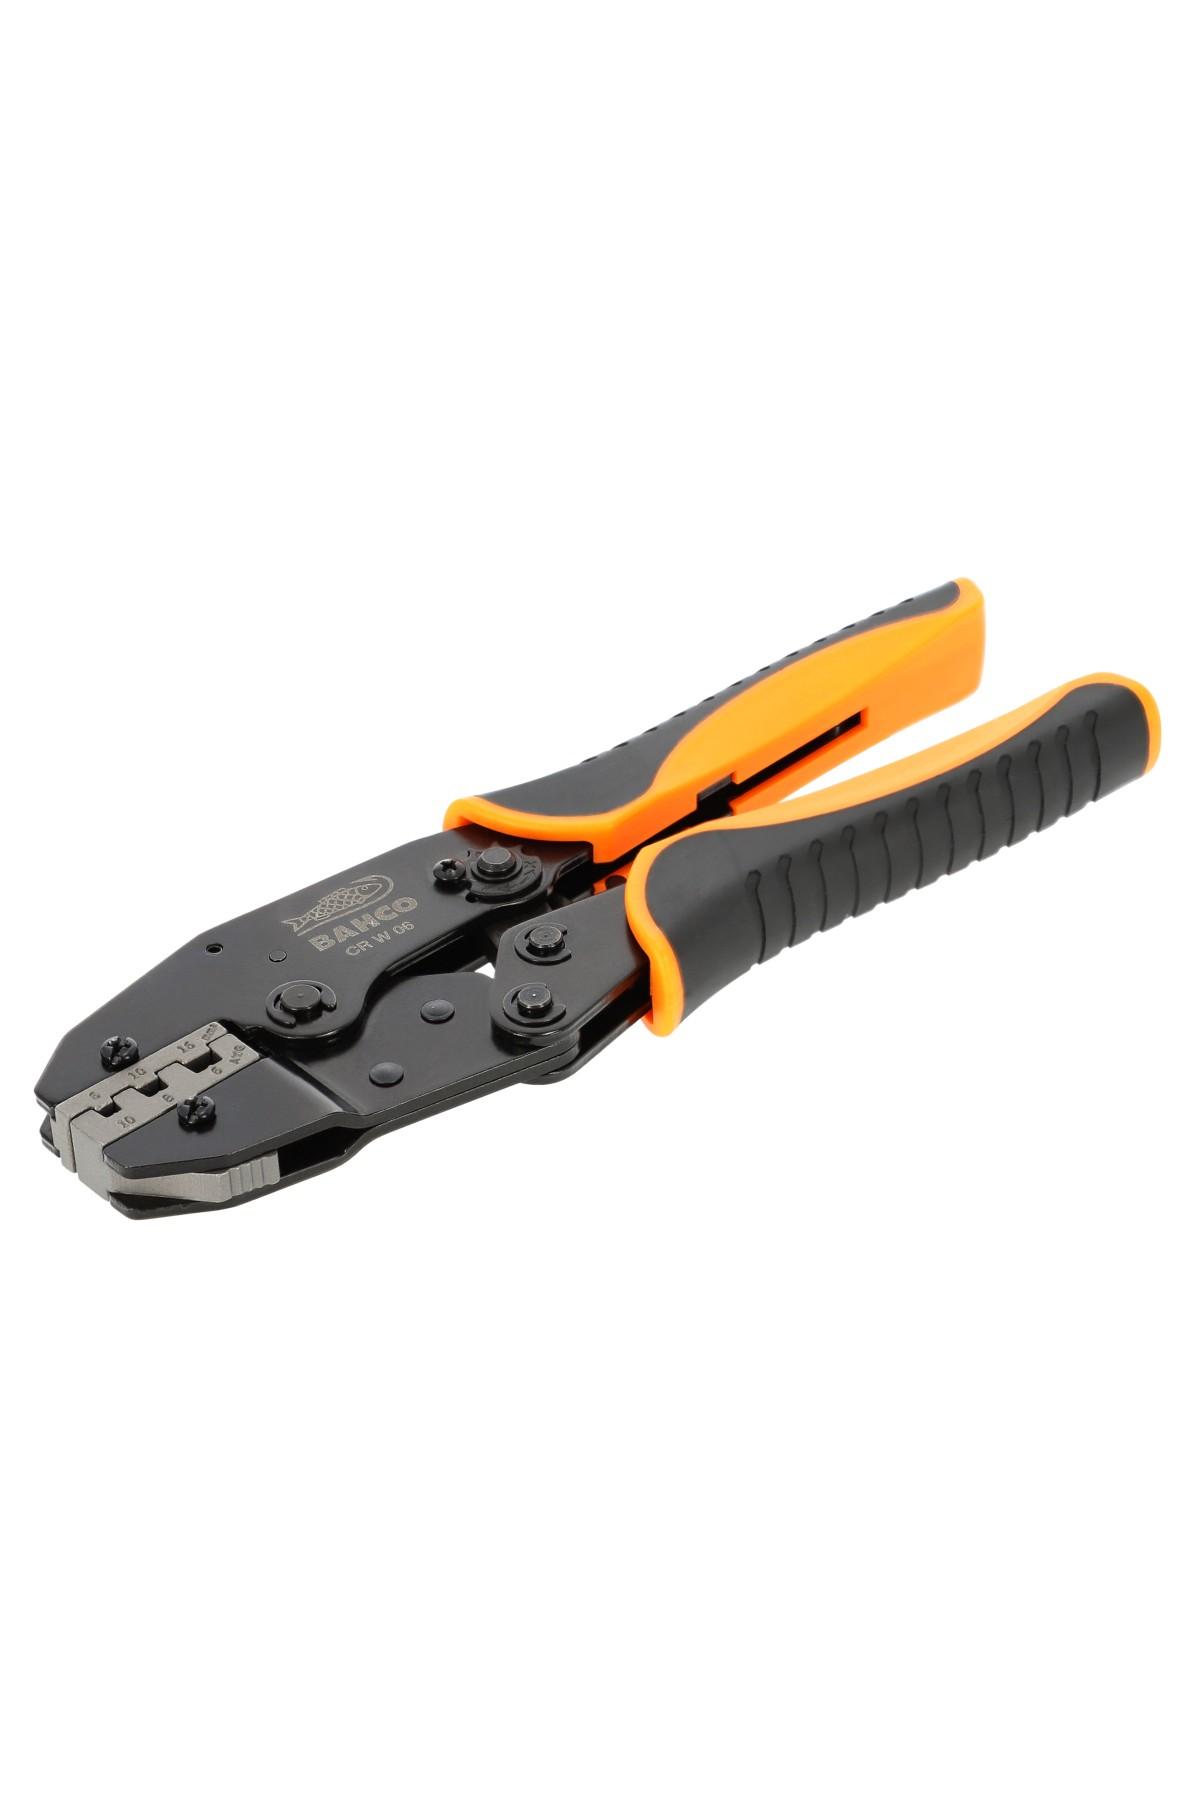 Crimping pliers with ratchet function for tubular connectors 6 AWG-16 AWG